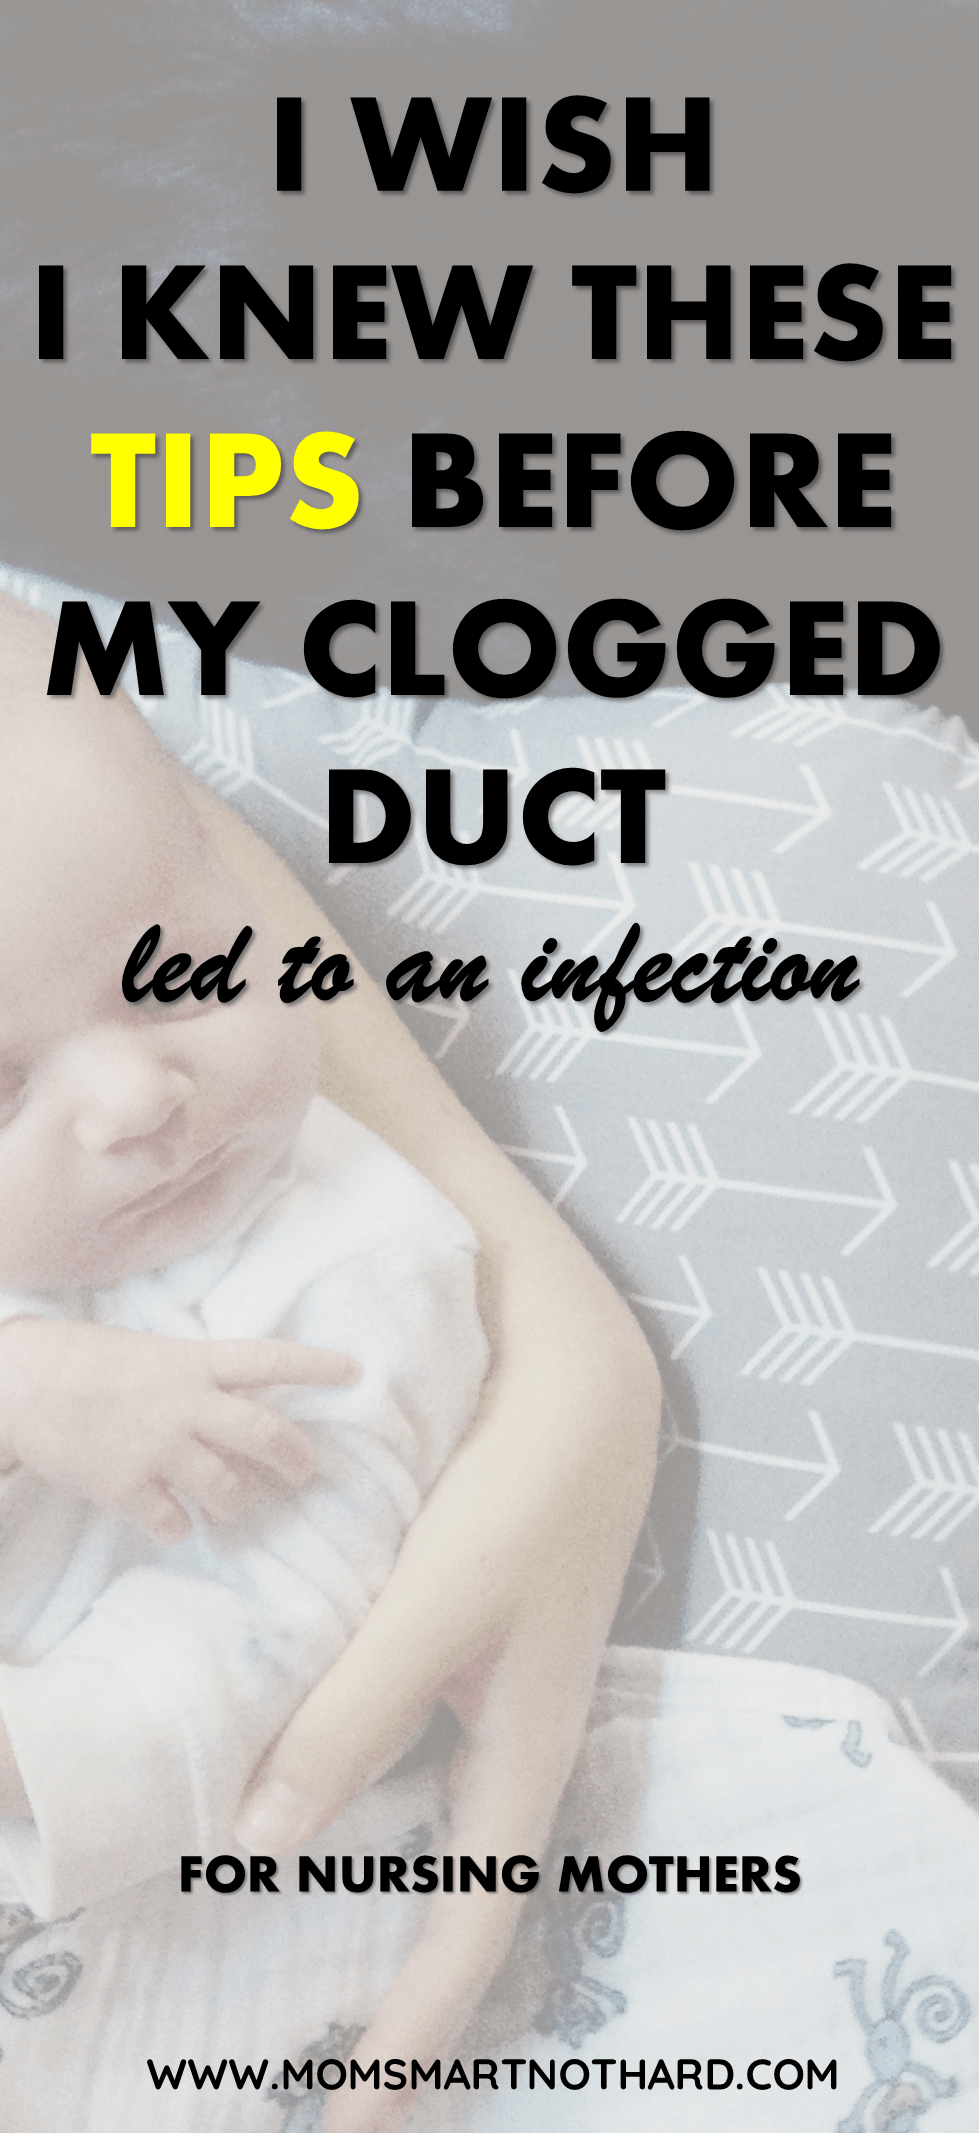 infection breast duct clogged